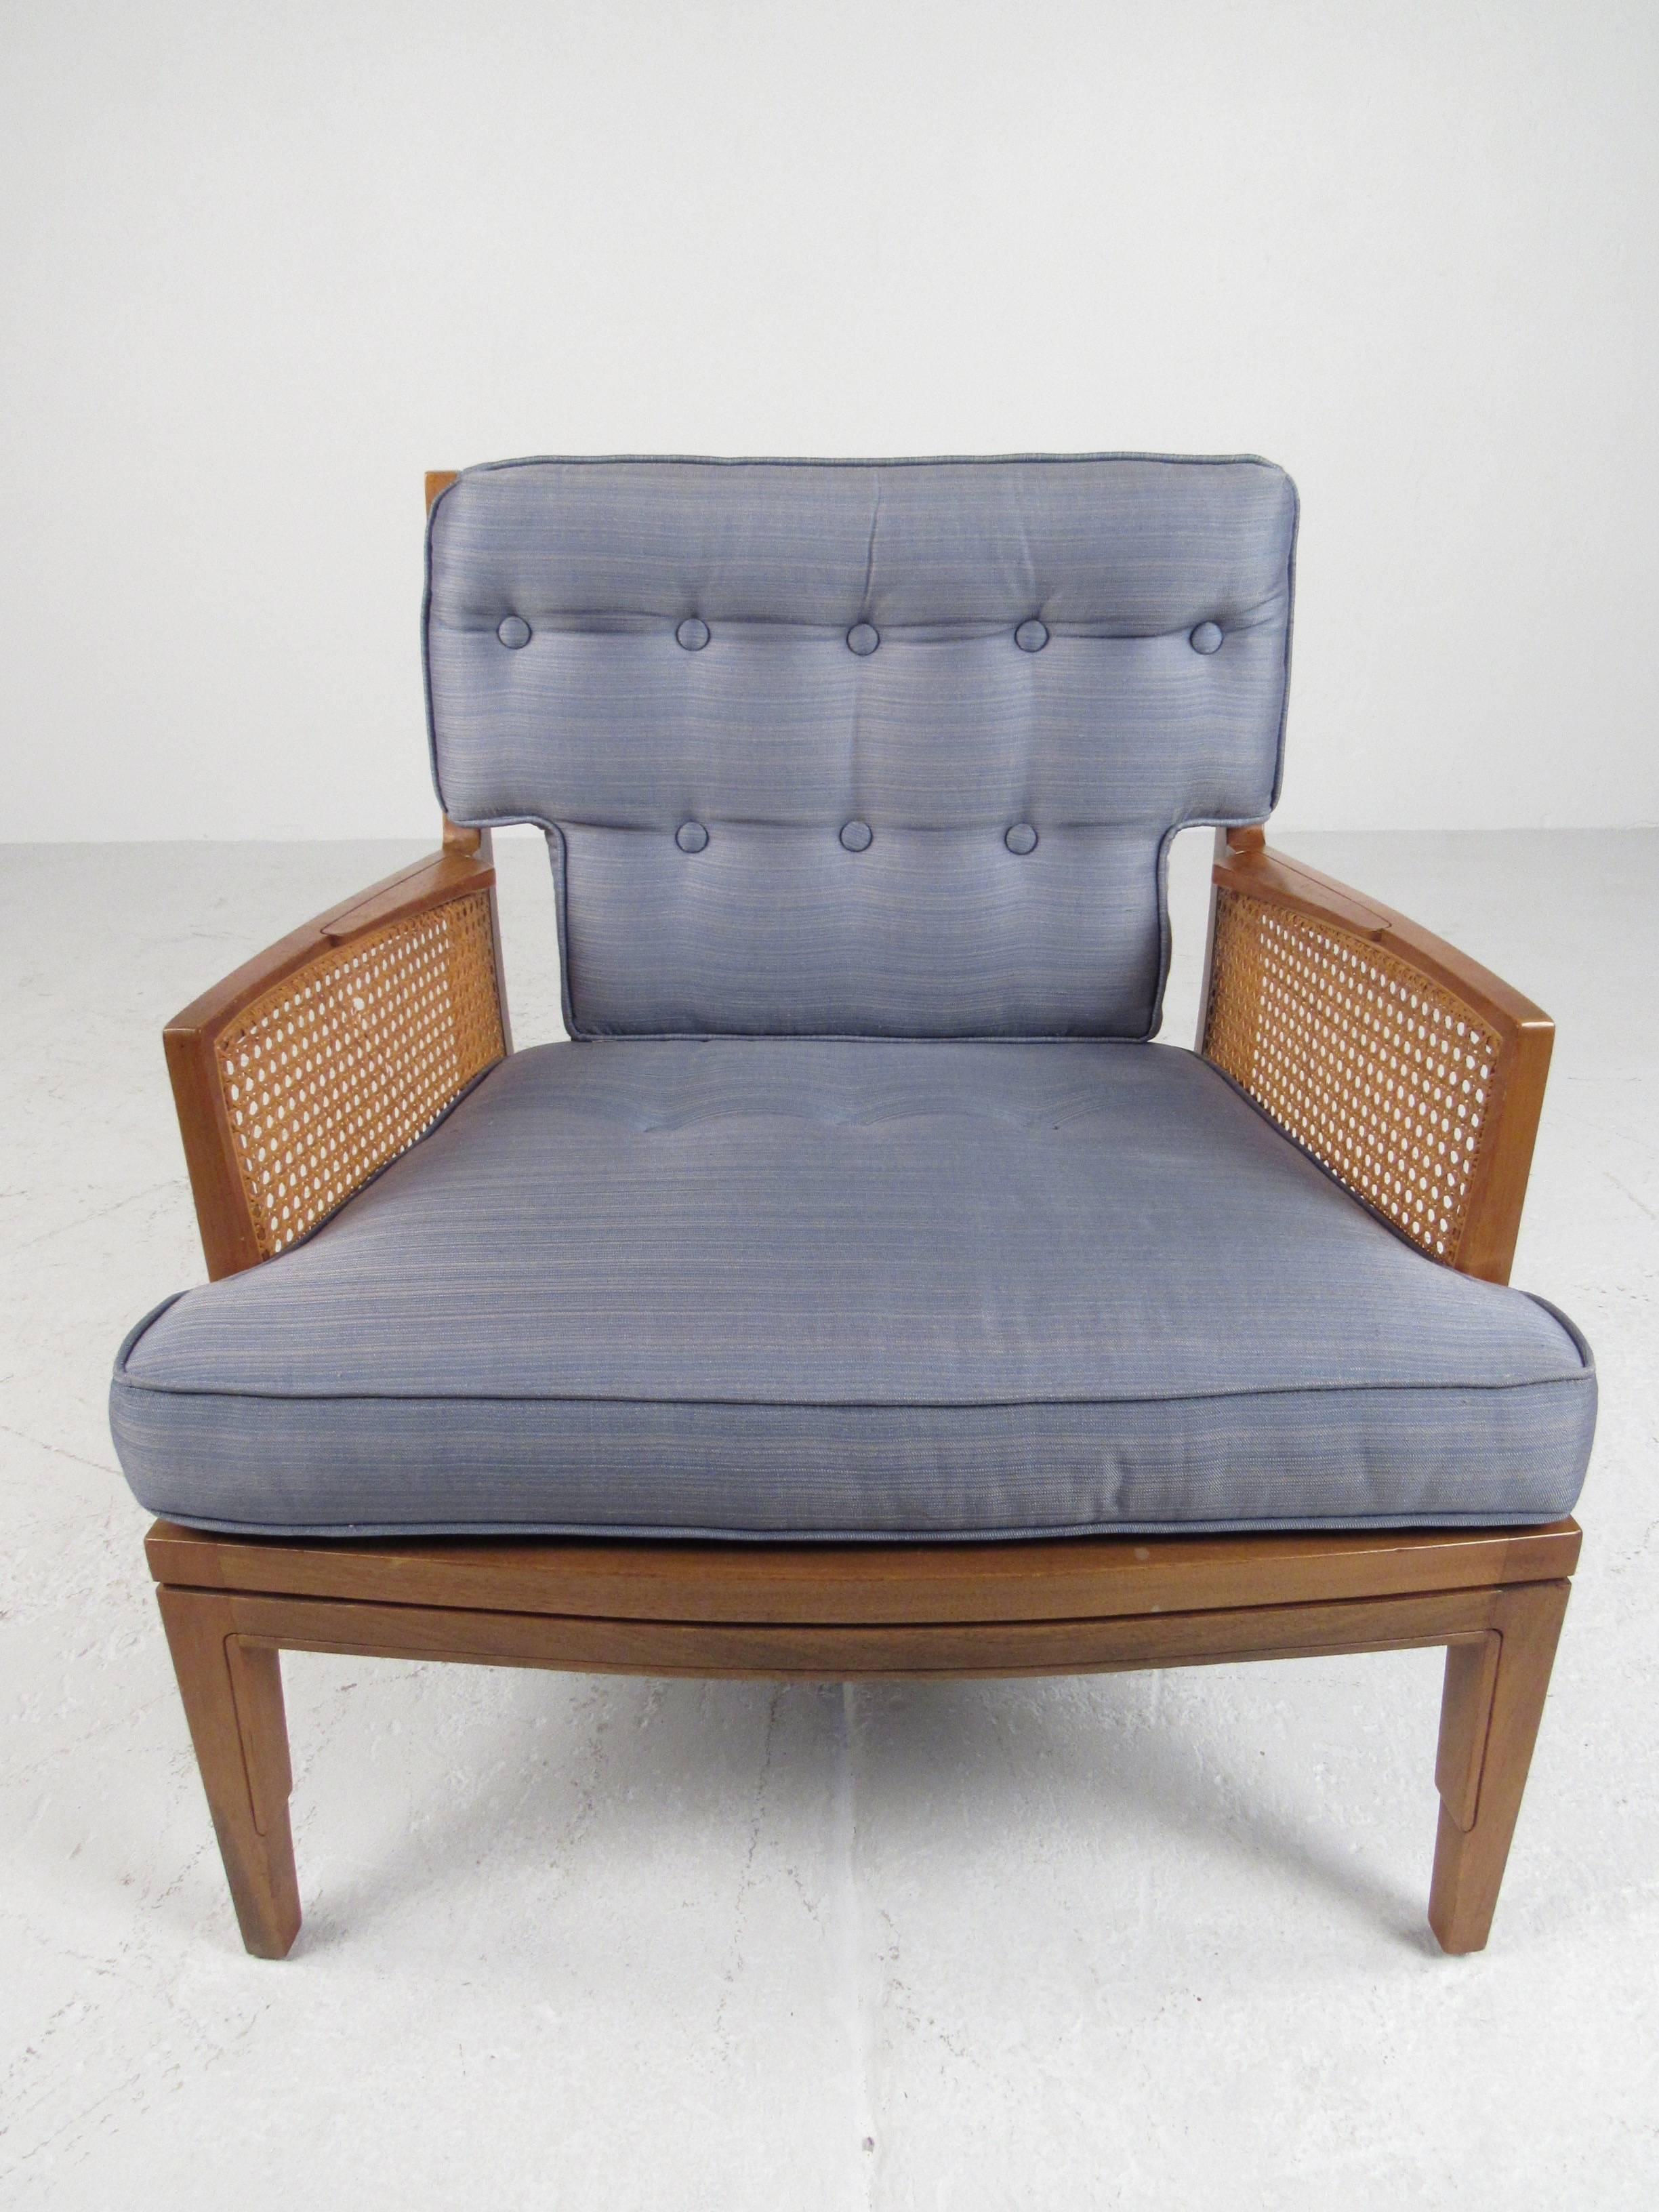 American Set of Four Walnut and Cane Lounge Chairs